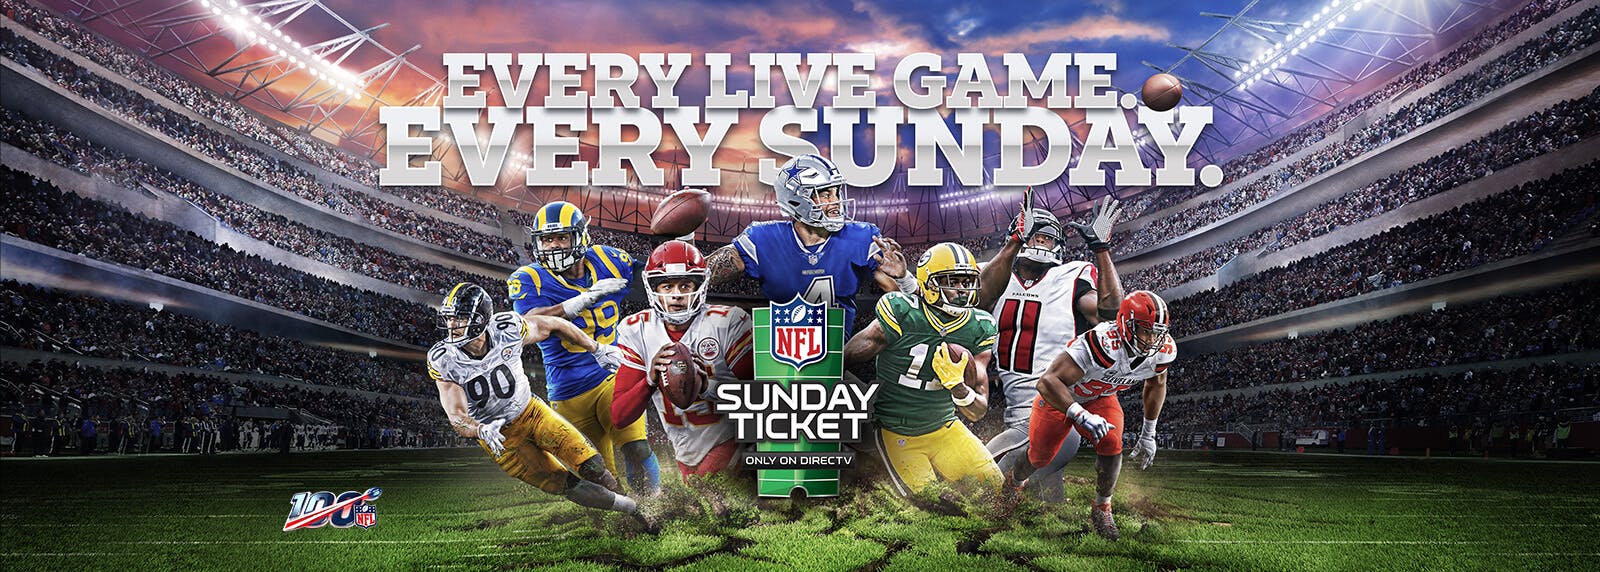 rams 49ers nfl sunday ticket streaming